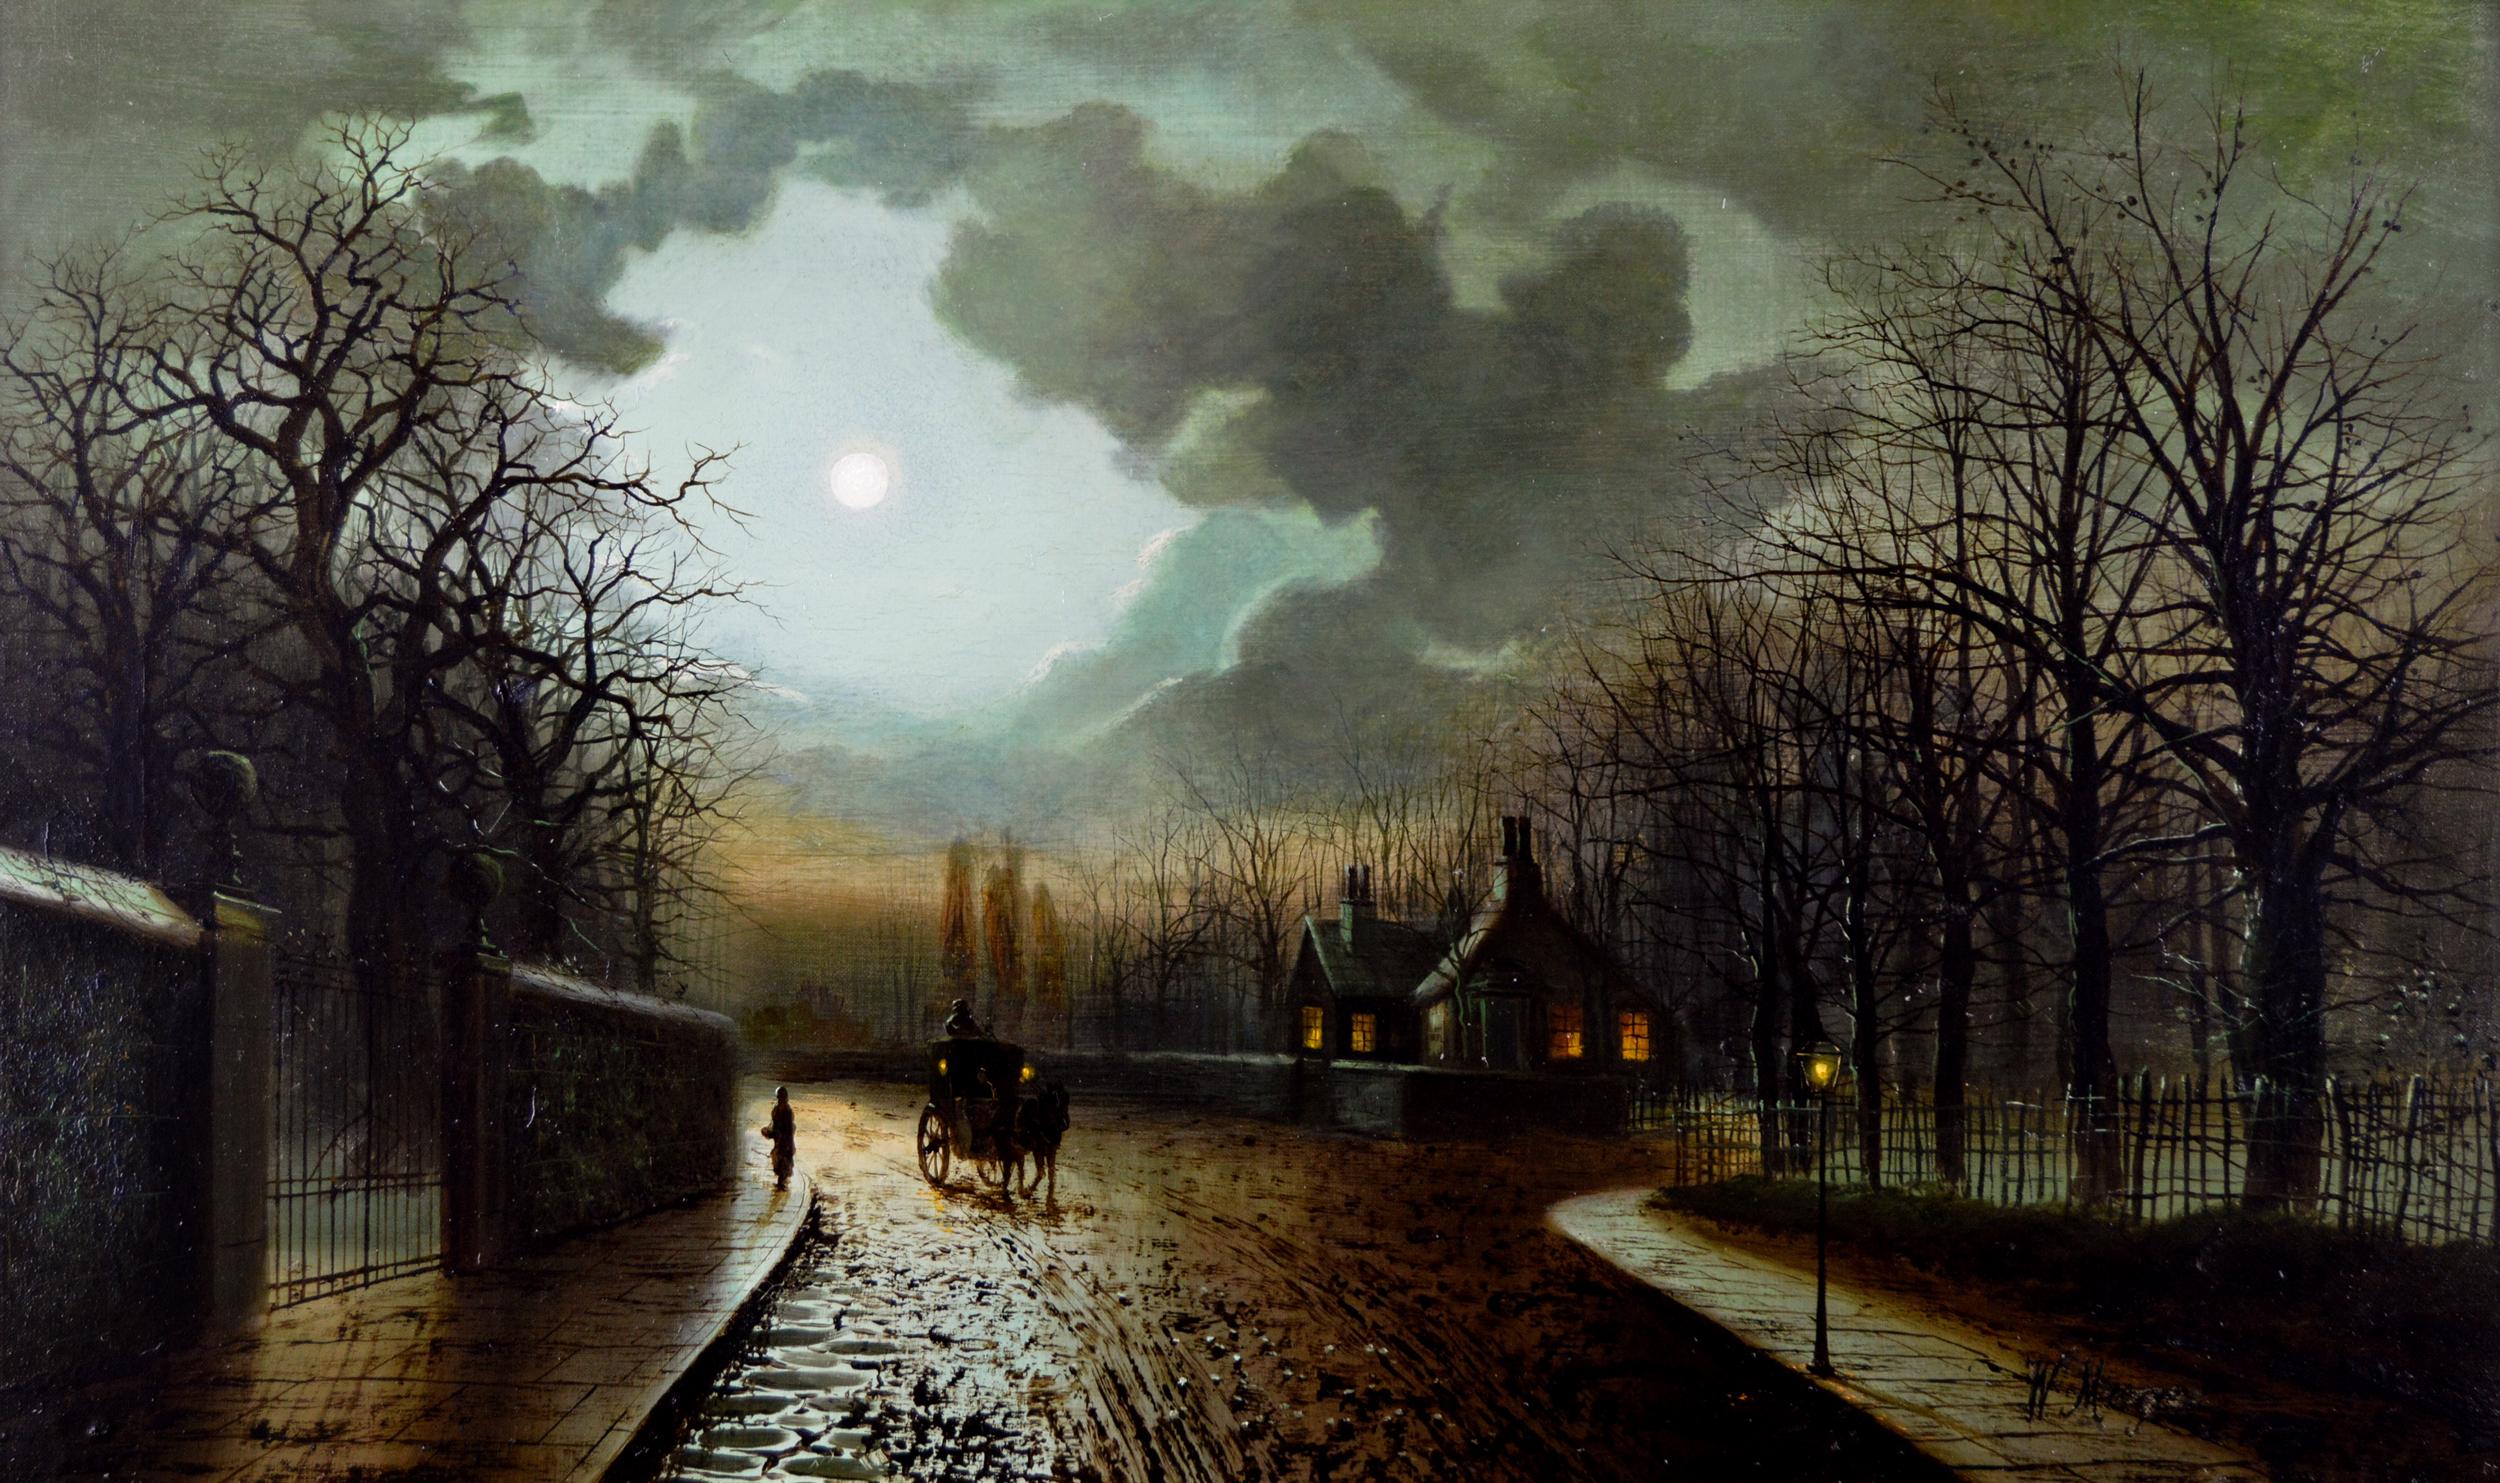 Carriage by Moonlight - Painting by Walter Linsley Meegan